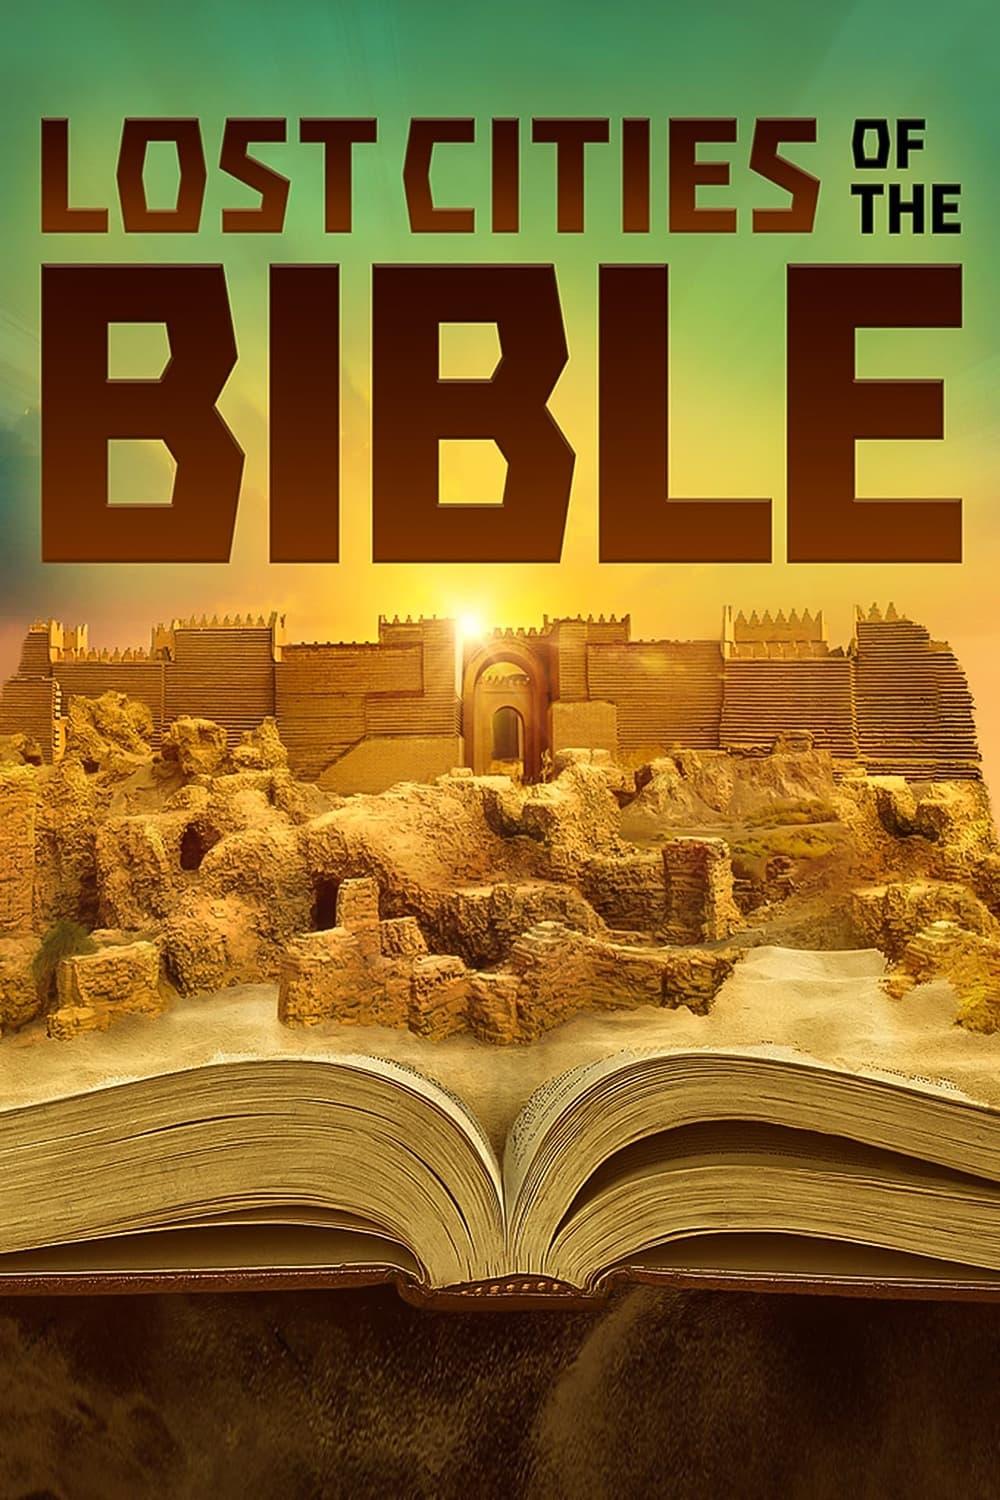 Lost Cities of the Bible poster